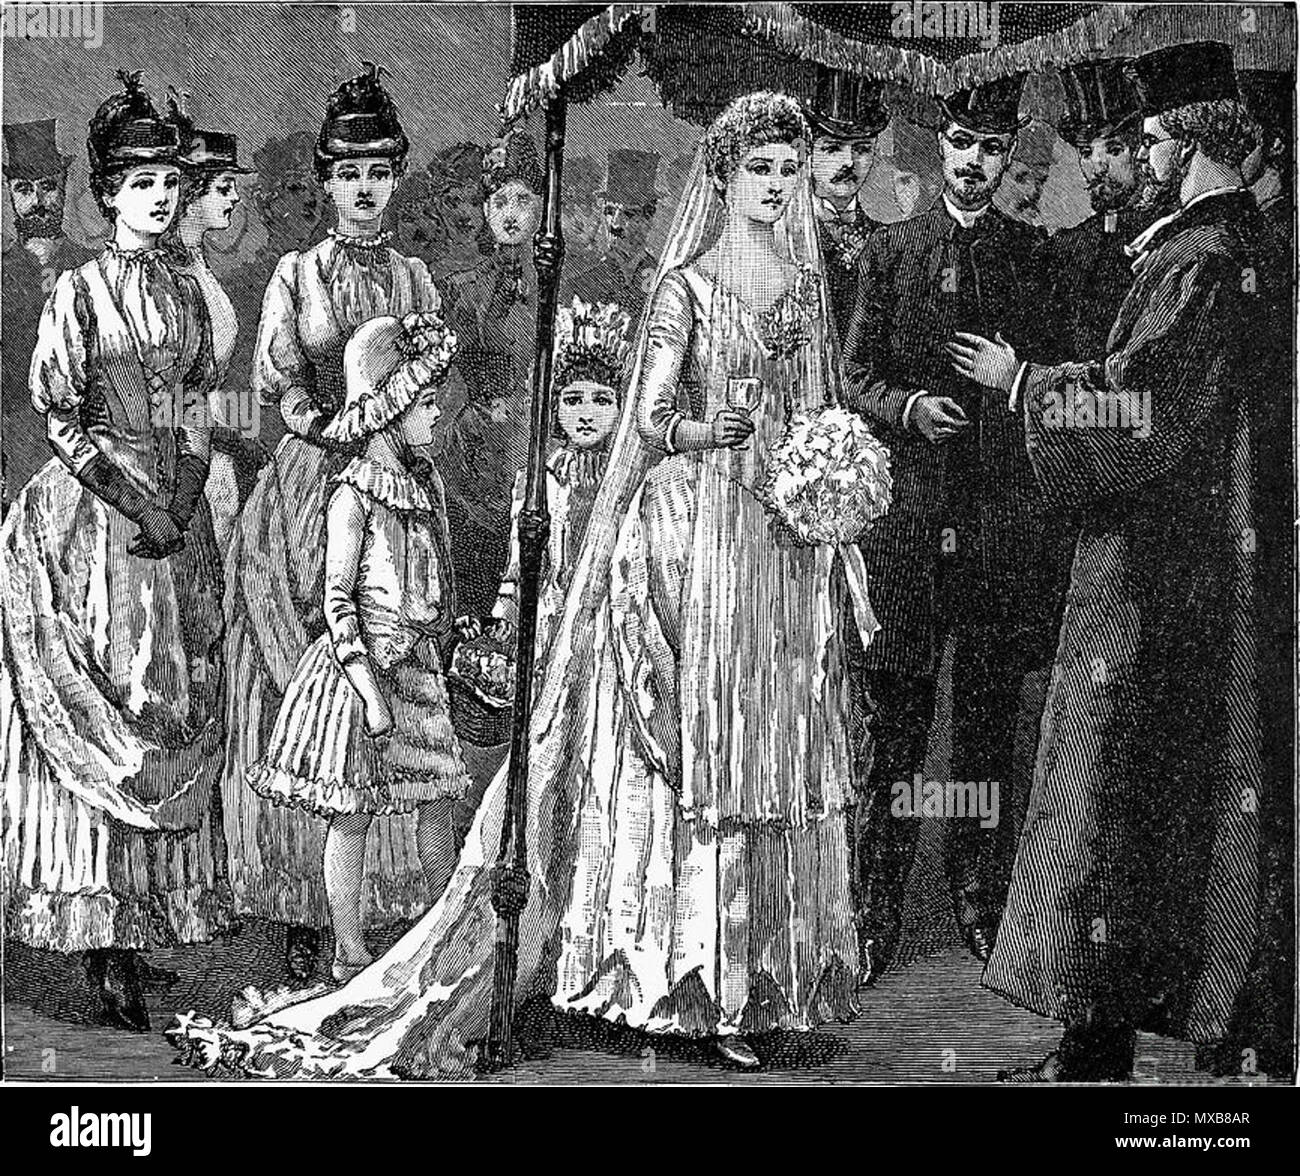 . English: Jewish marriage ceremony c 1892. Original Source: From John Clark Ridpath: Ridpath's universal history: an account of the origin, primitive condition, and race development of the greater division of mankind. (New York : Merrill & Baker, c1899). 1892. R. Taylor (1870-1900); Charles Henry Granger (1812-93) 316 Jewish-wedding-c1892-granger Stock Photo